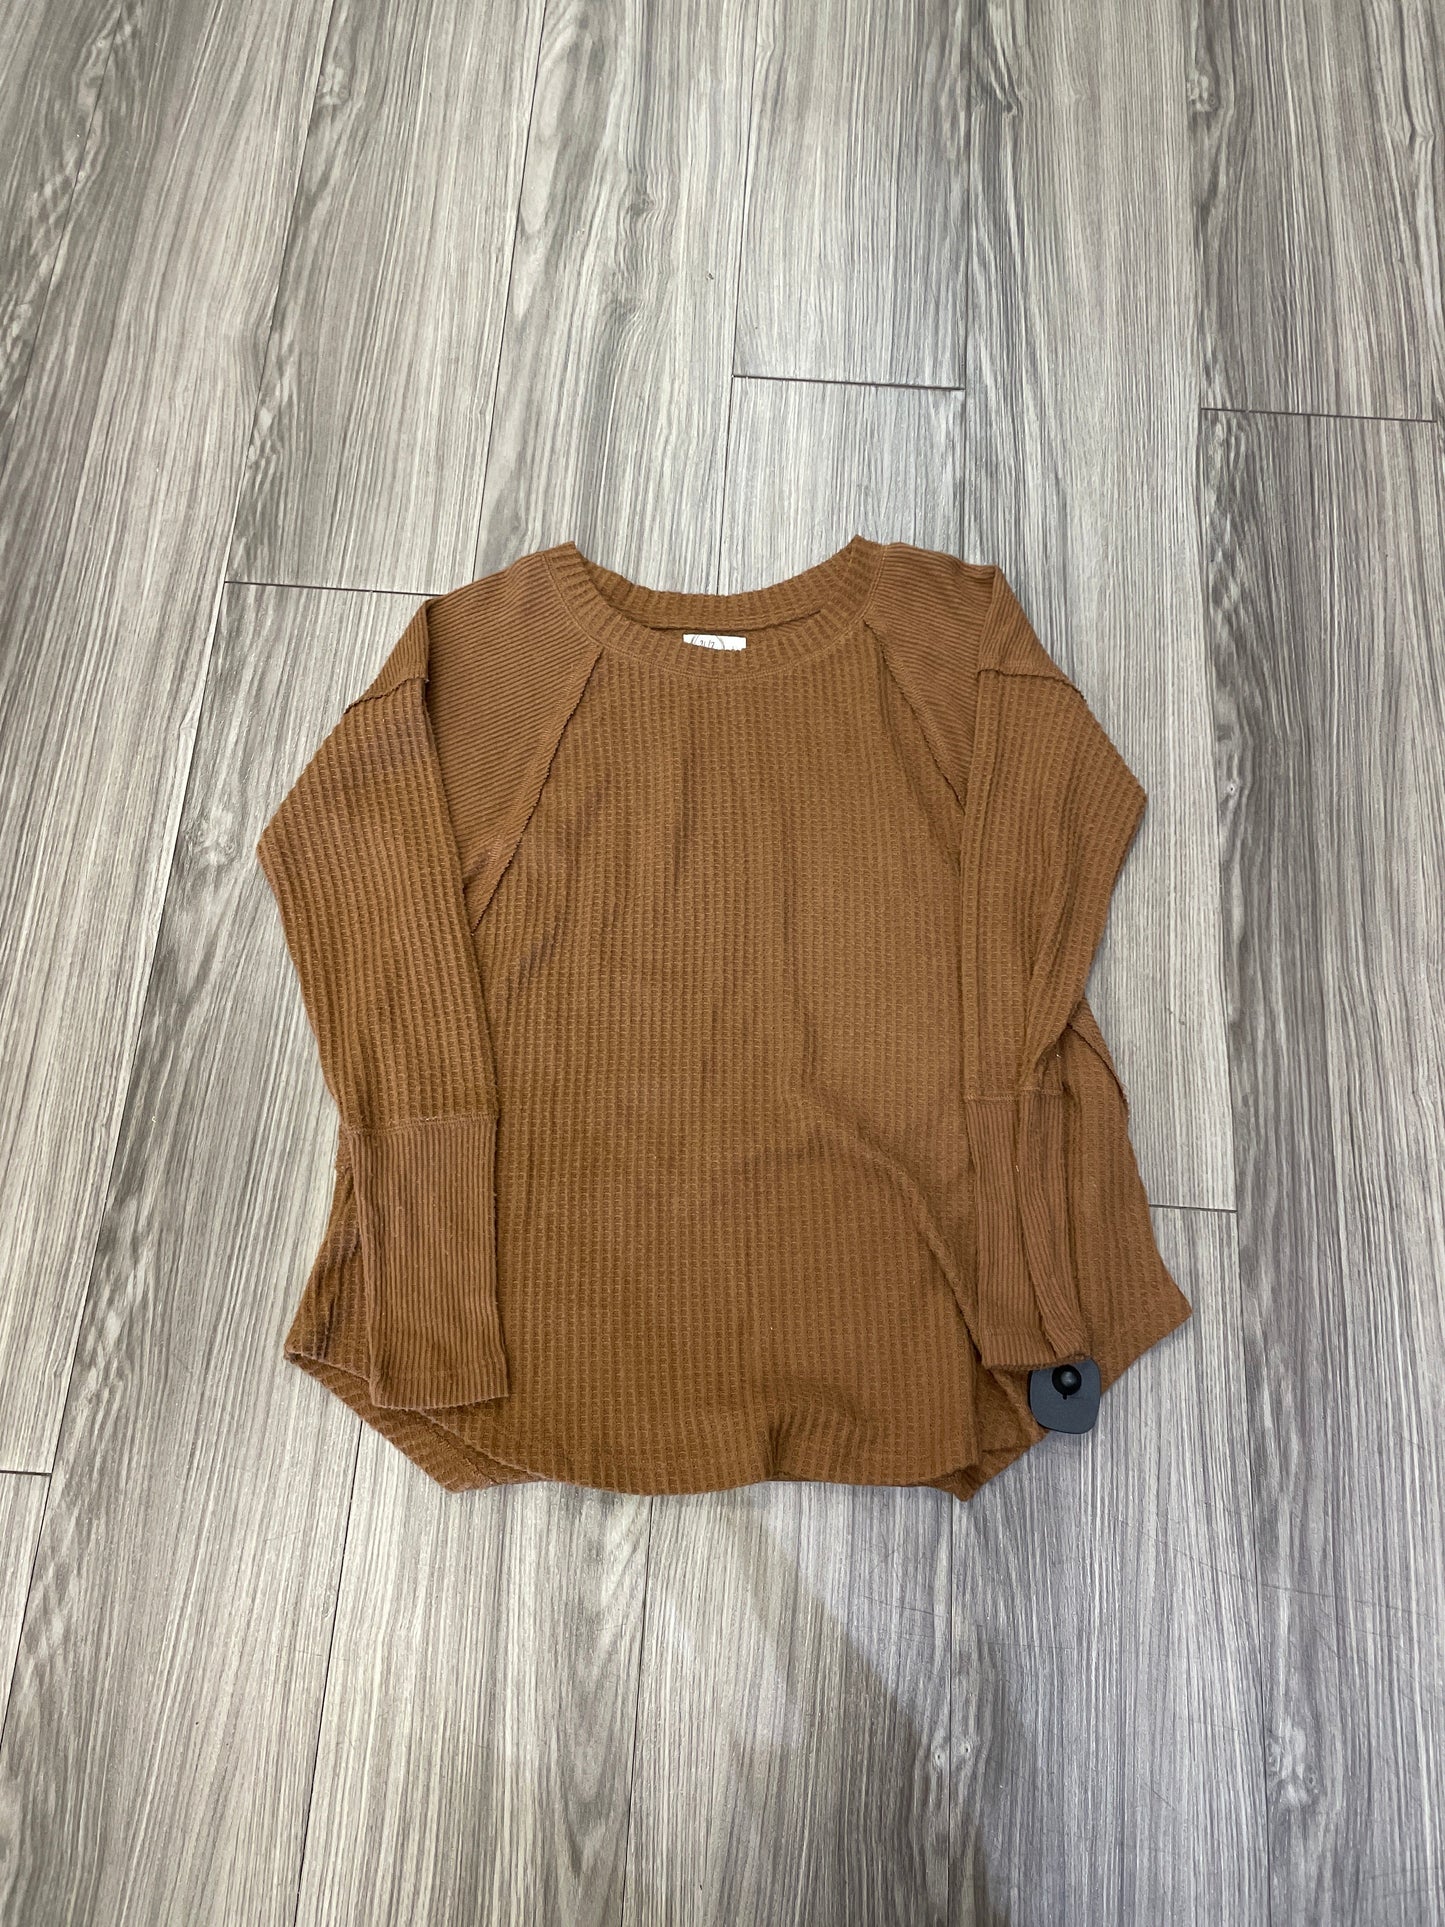 Brown Top Long Sleeve Maurices, Size Xs